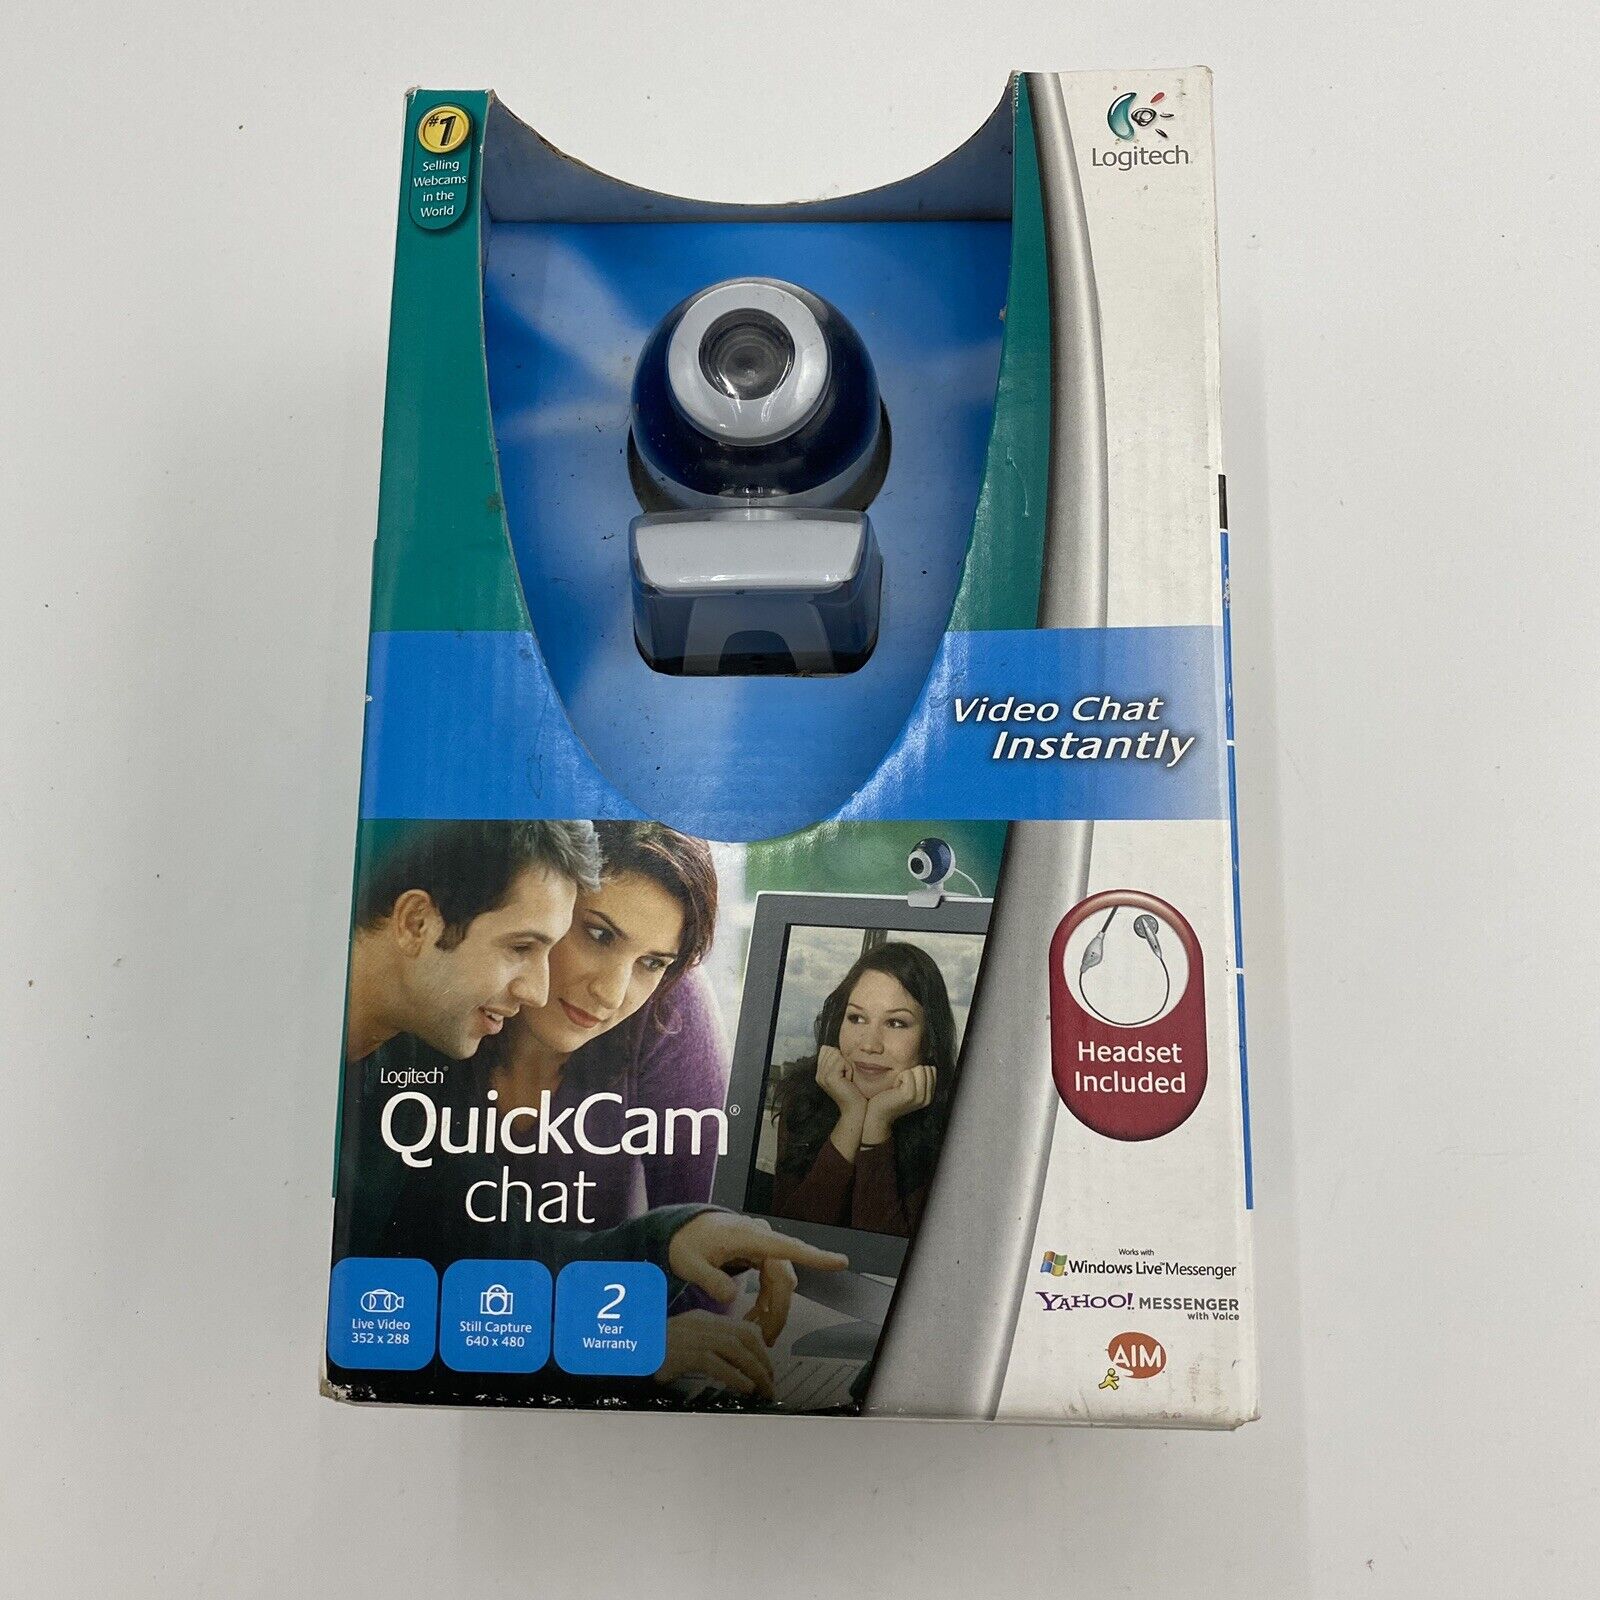 Vintage Logitech Quickcam Chat Webcam (New in Sealed Box) Headset Included 